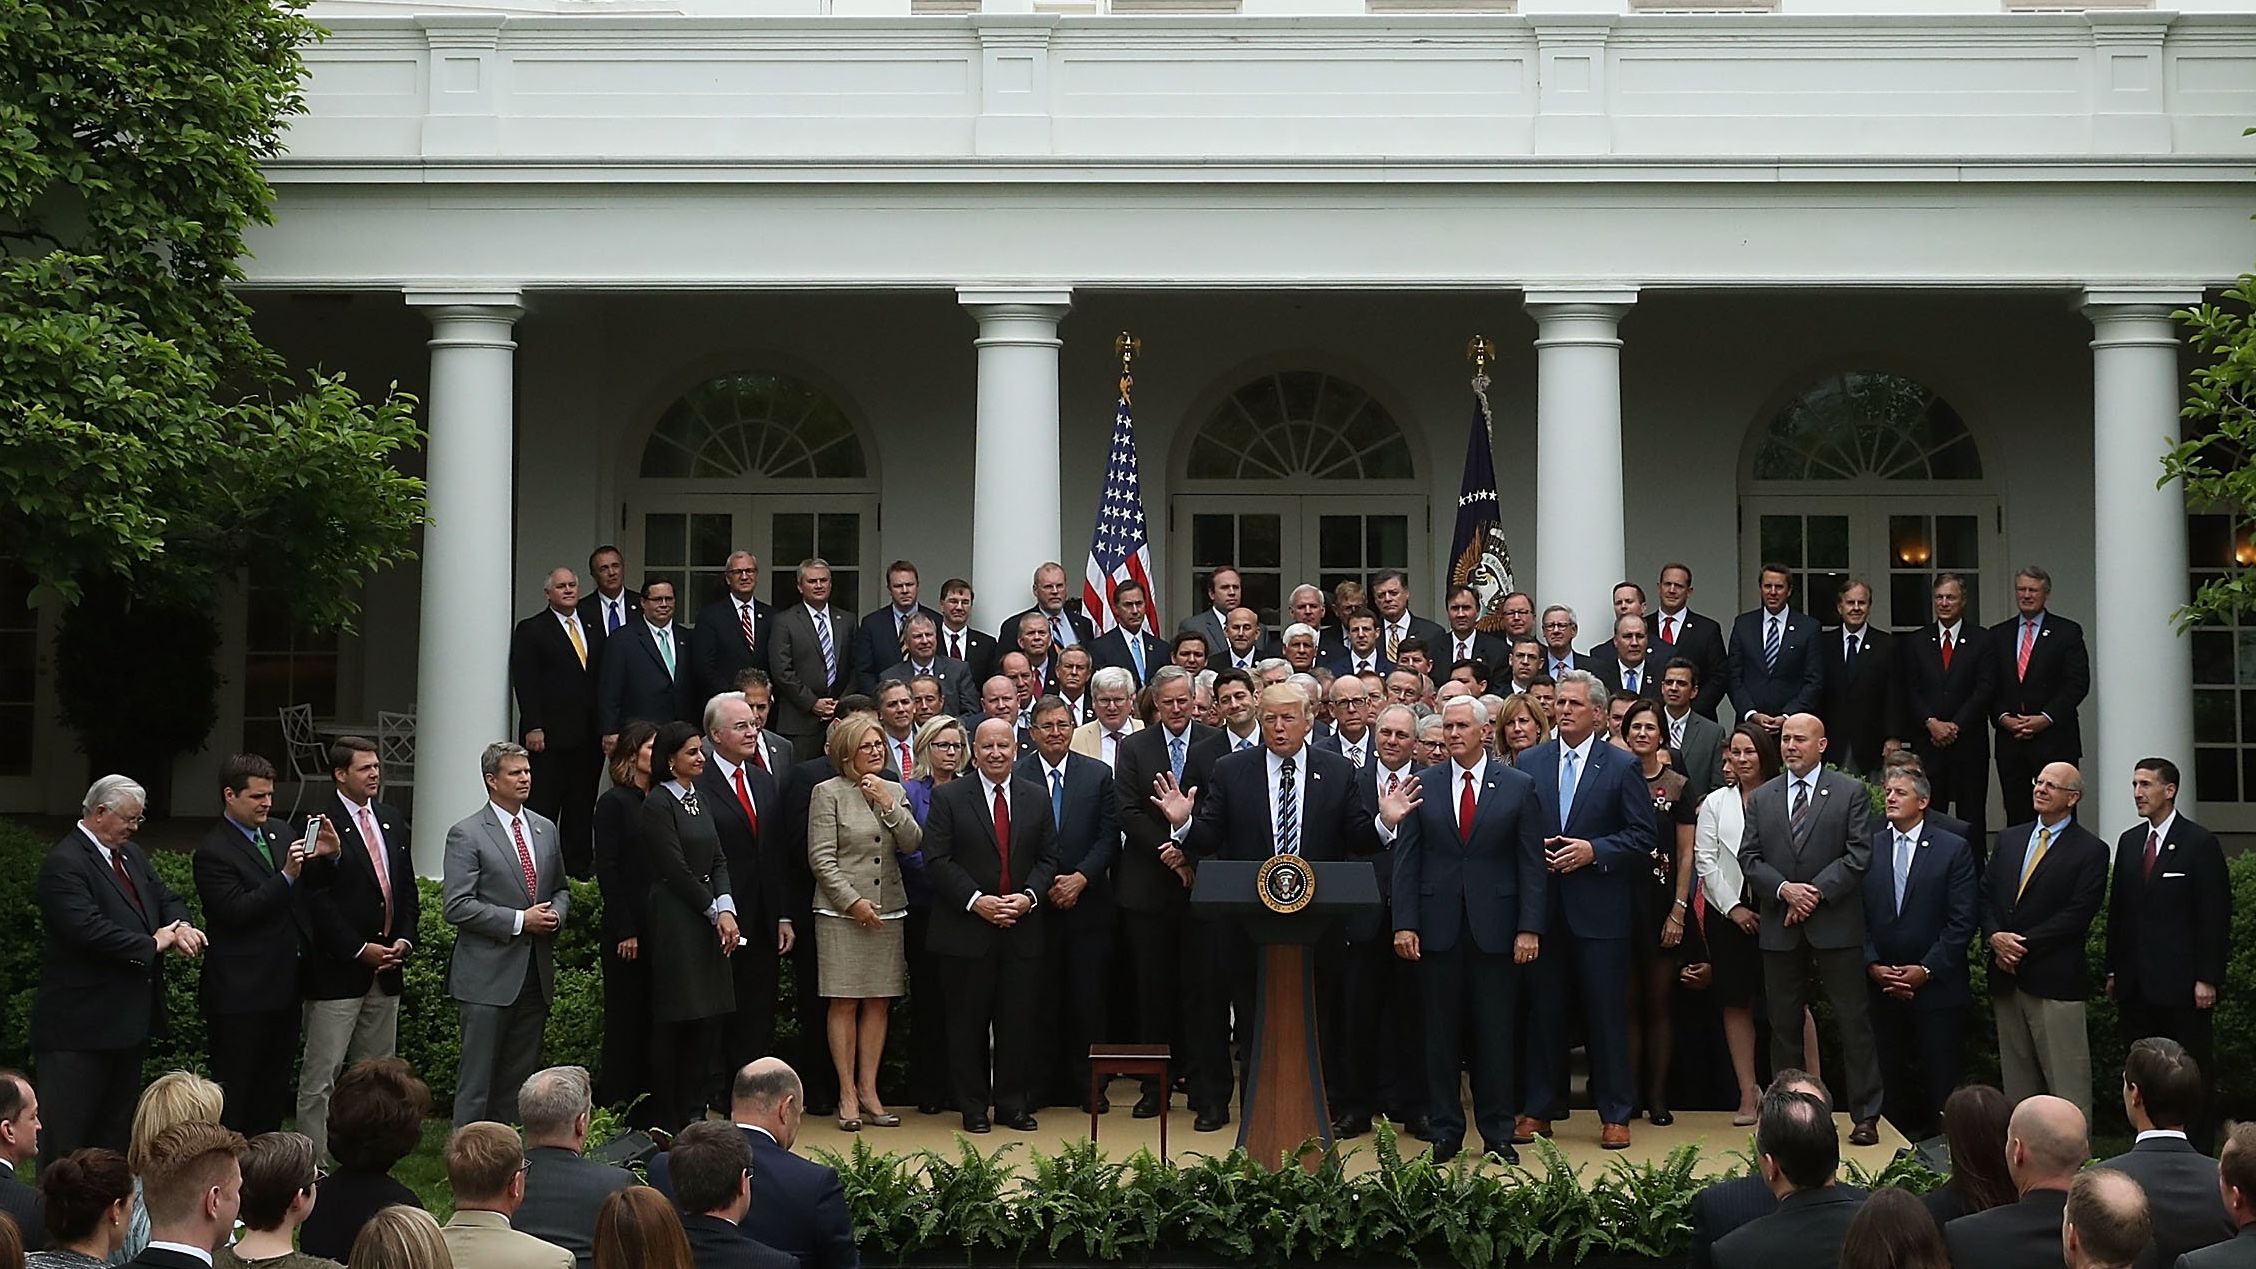 WASHINGTON, DC - MAY 04:  U.S. President Donald Trump speaks while flanked by House Republicans after they passed legislation aimed at repealing and replacing ObamaCare, during an event in the Rose Garden at the White House, on May 4, 2017 in Washington, DC. The House bill would still need to pass the Senate before being signed into law.  (Photo by Mark Wilson/Getty Images